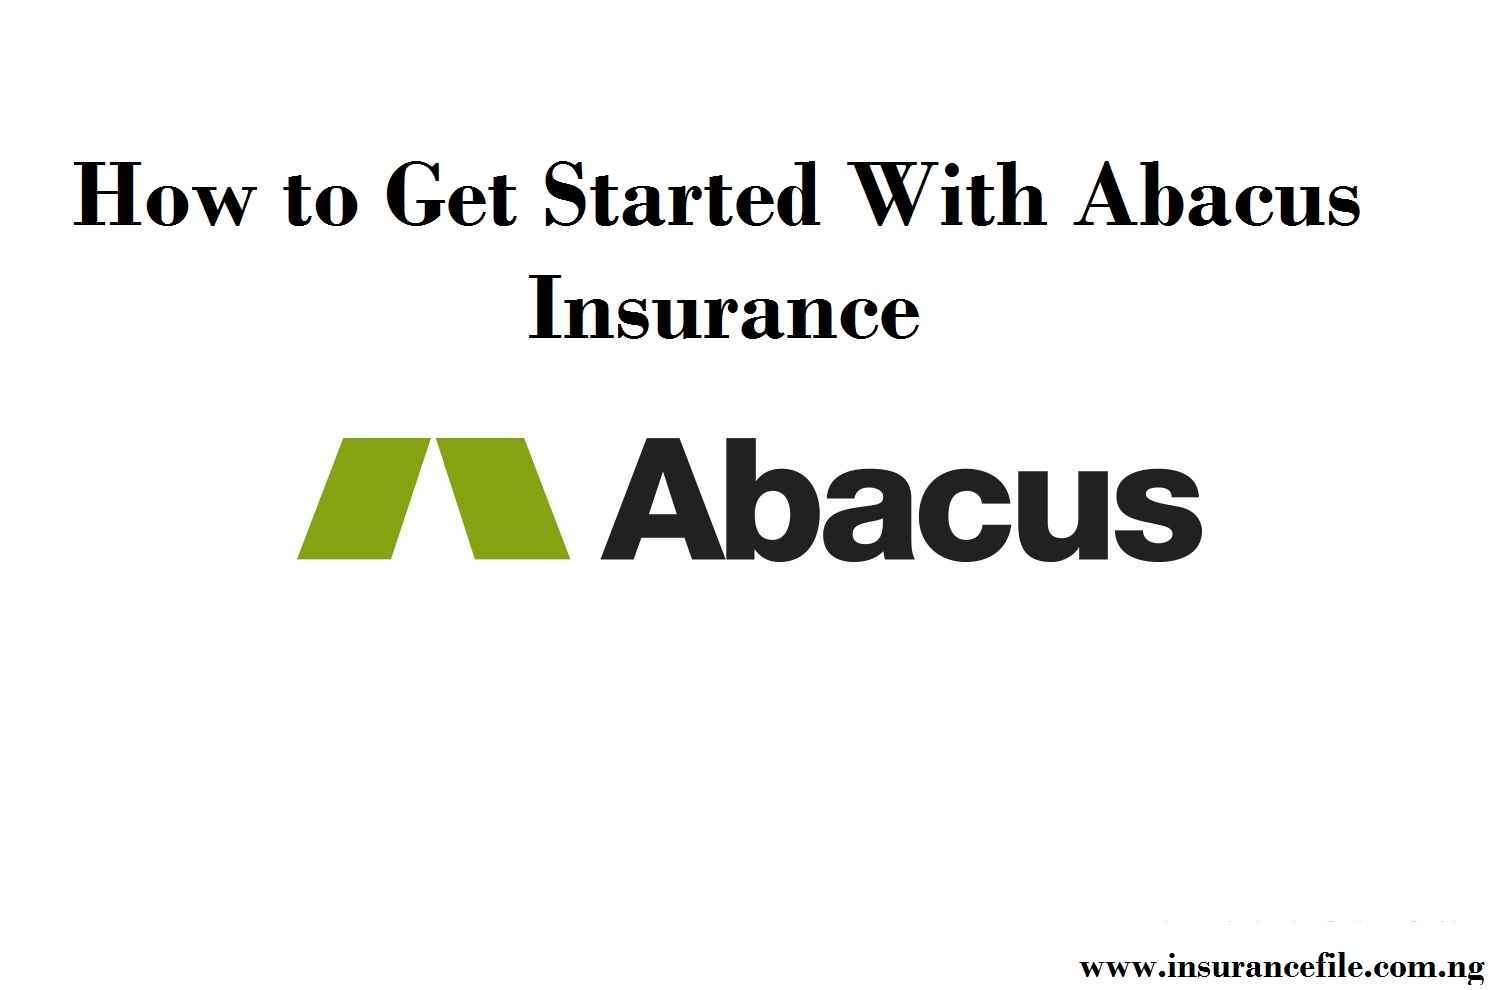 How to Get Started With Abacus Insurance